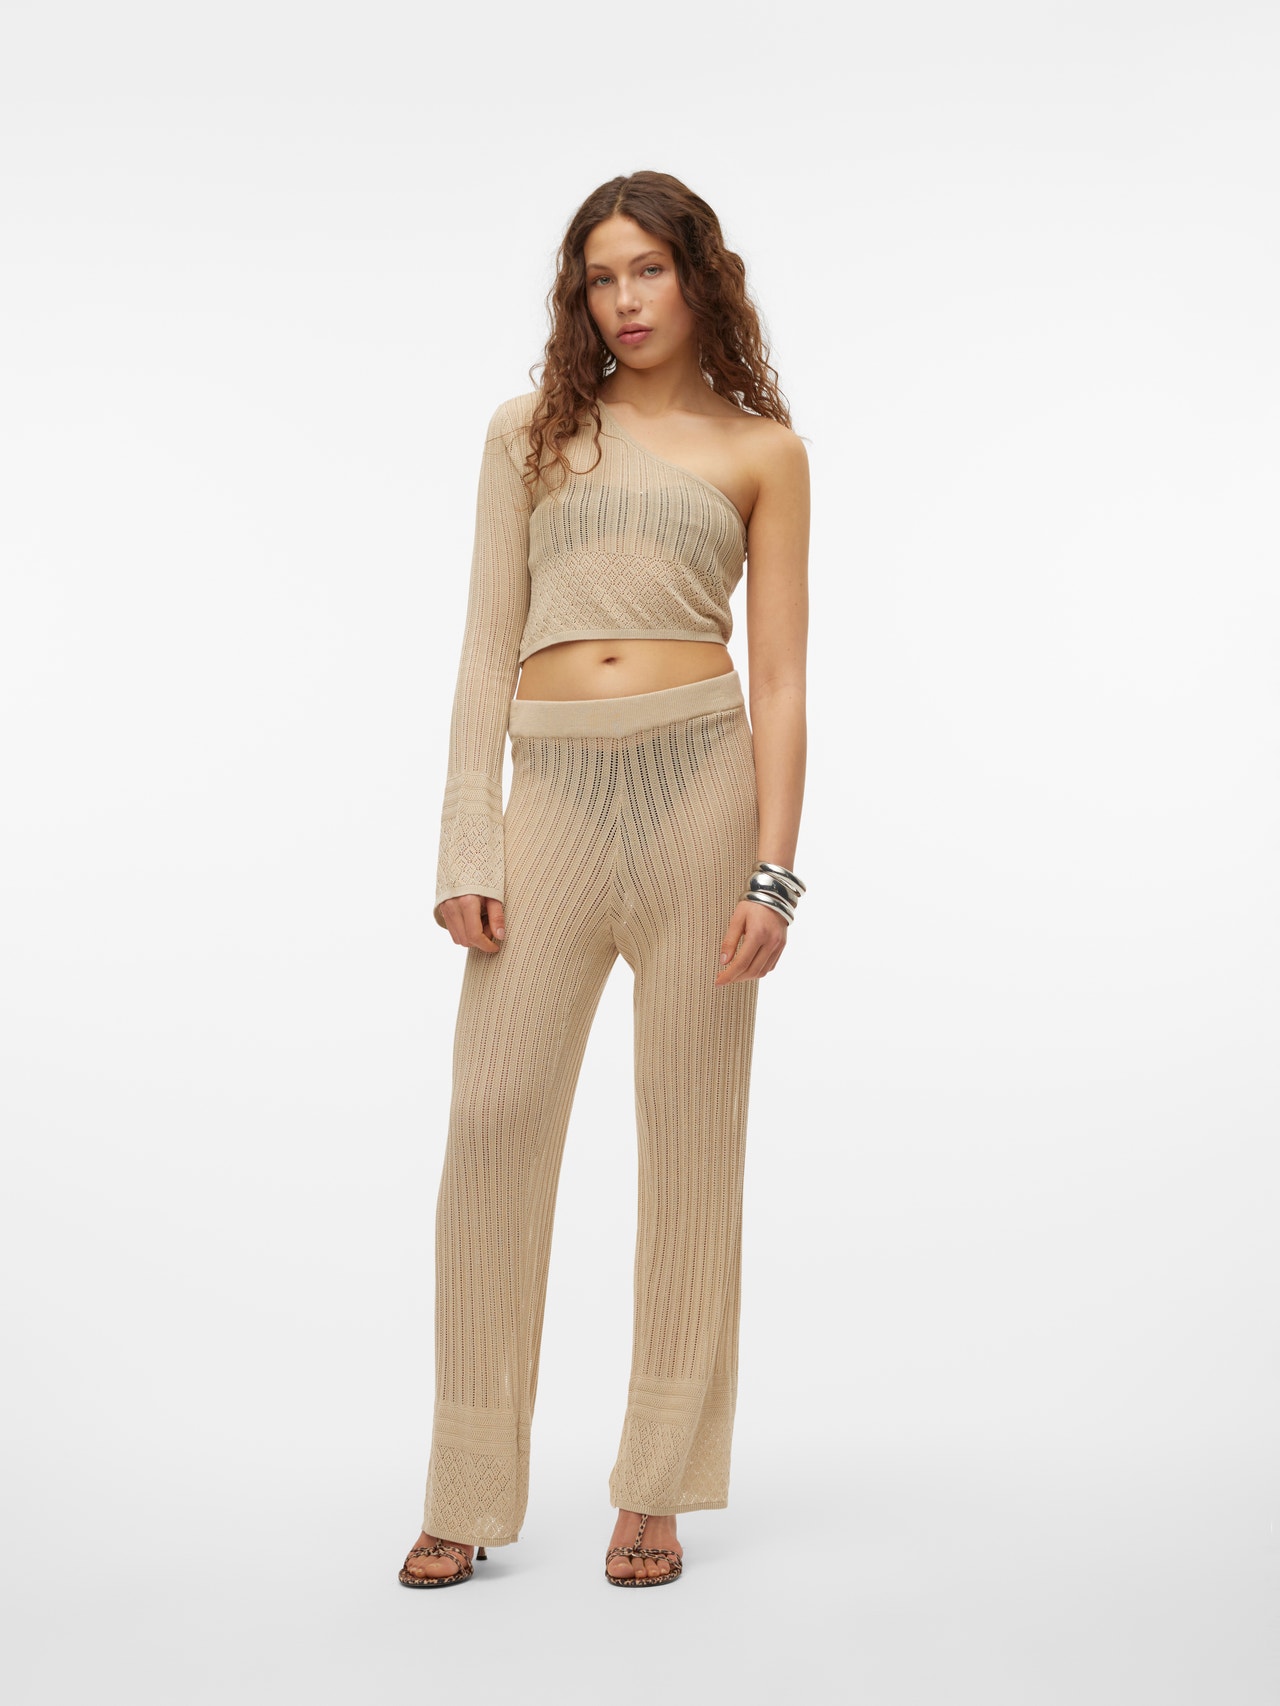 Vero Moda SOMETHINGNEW Styled by; Cenit Nadir Trousers -Marzipan - 10307805